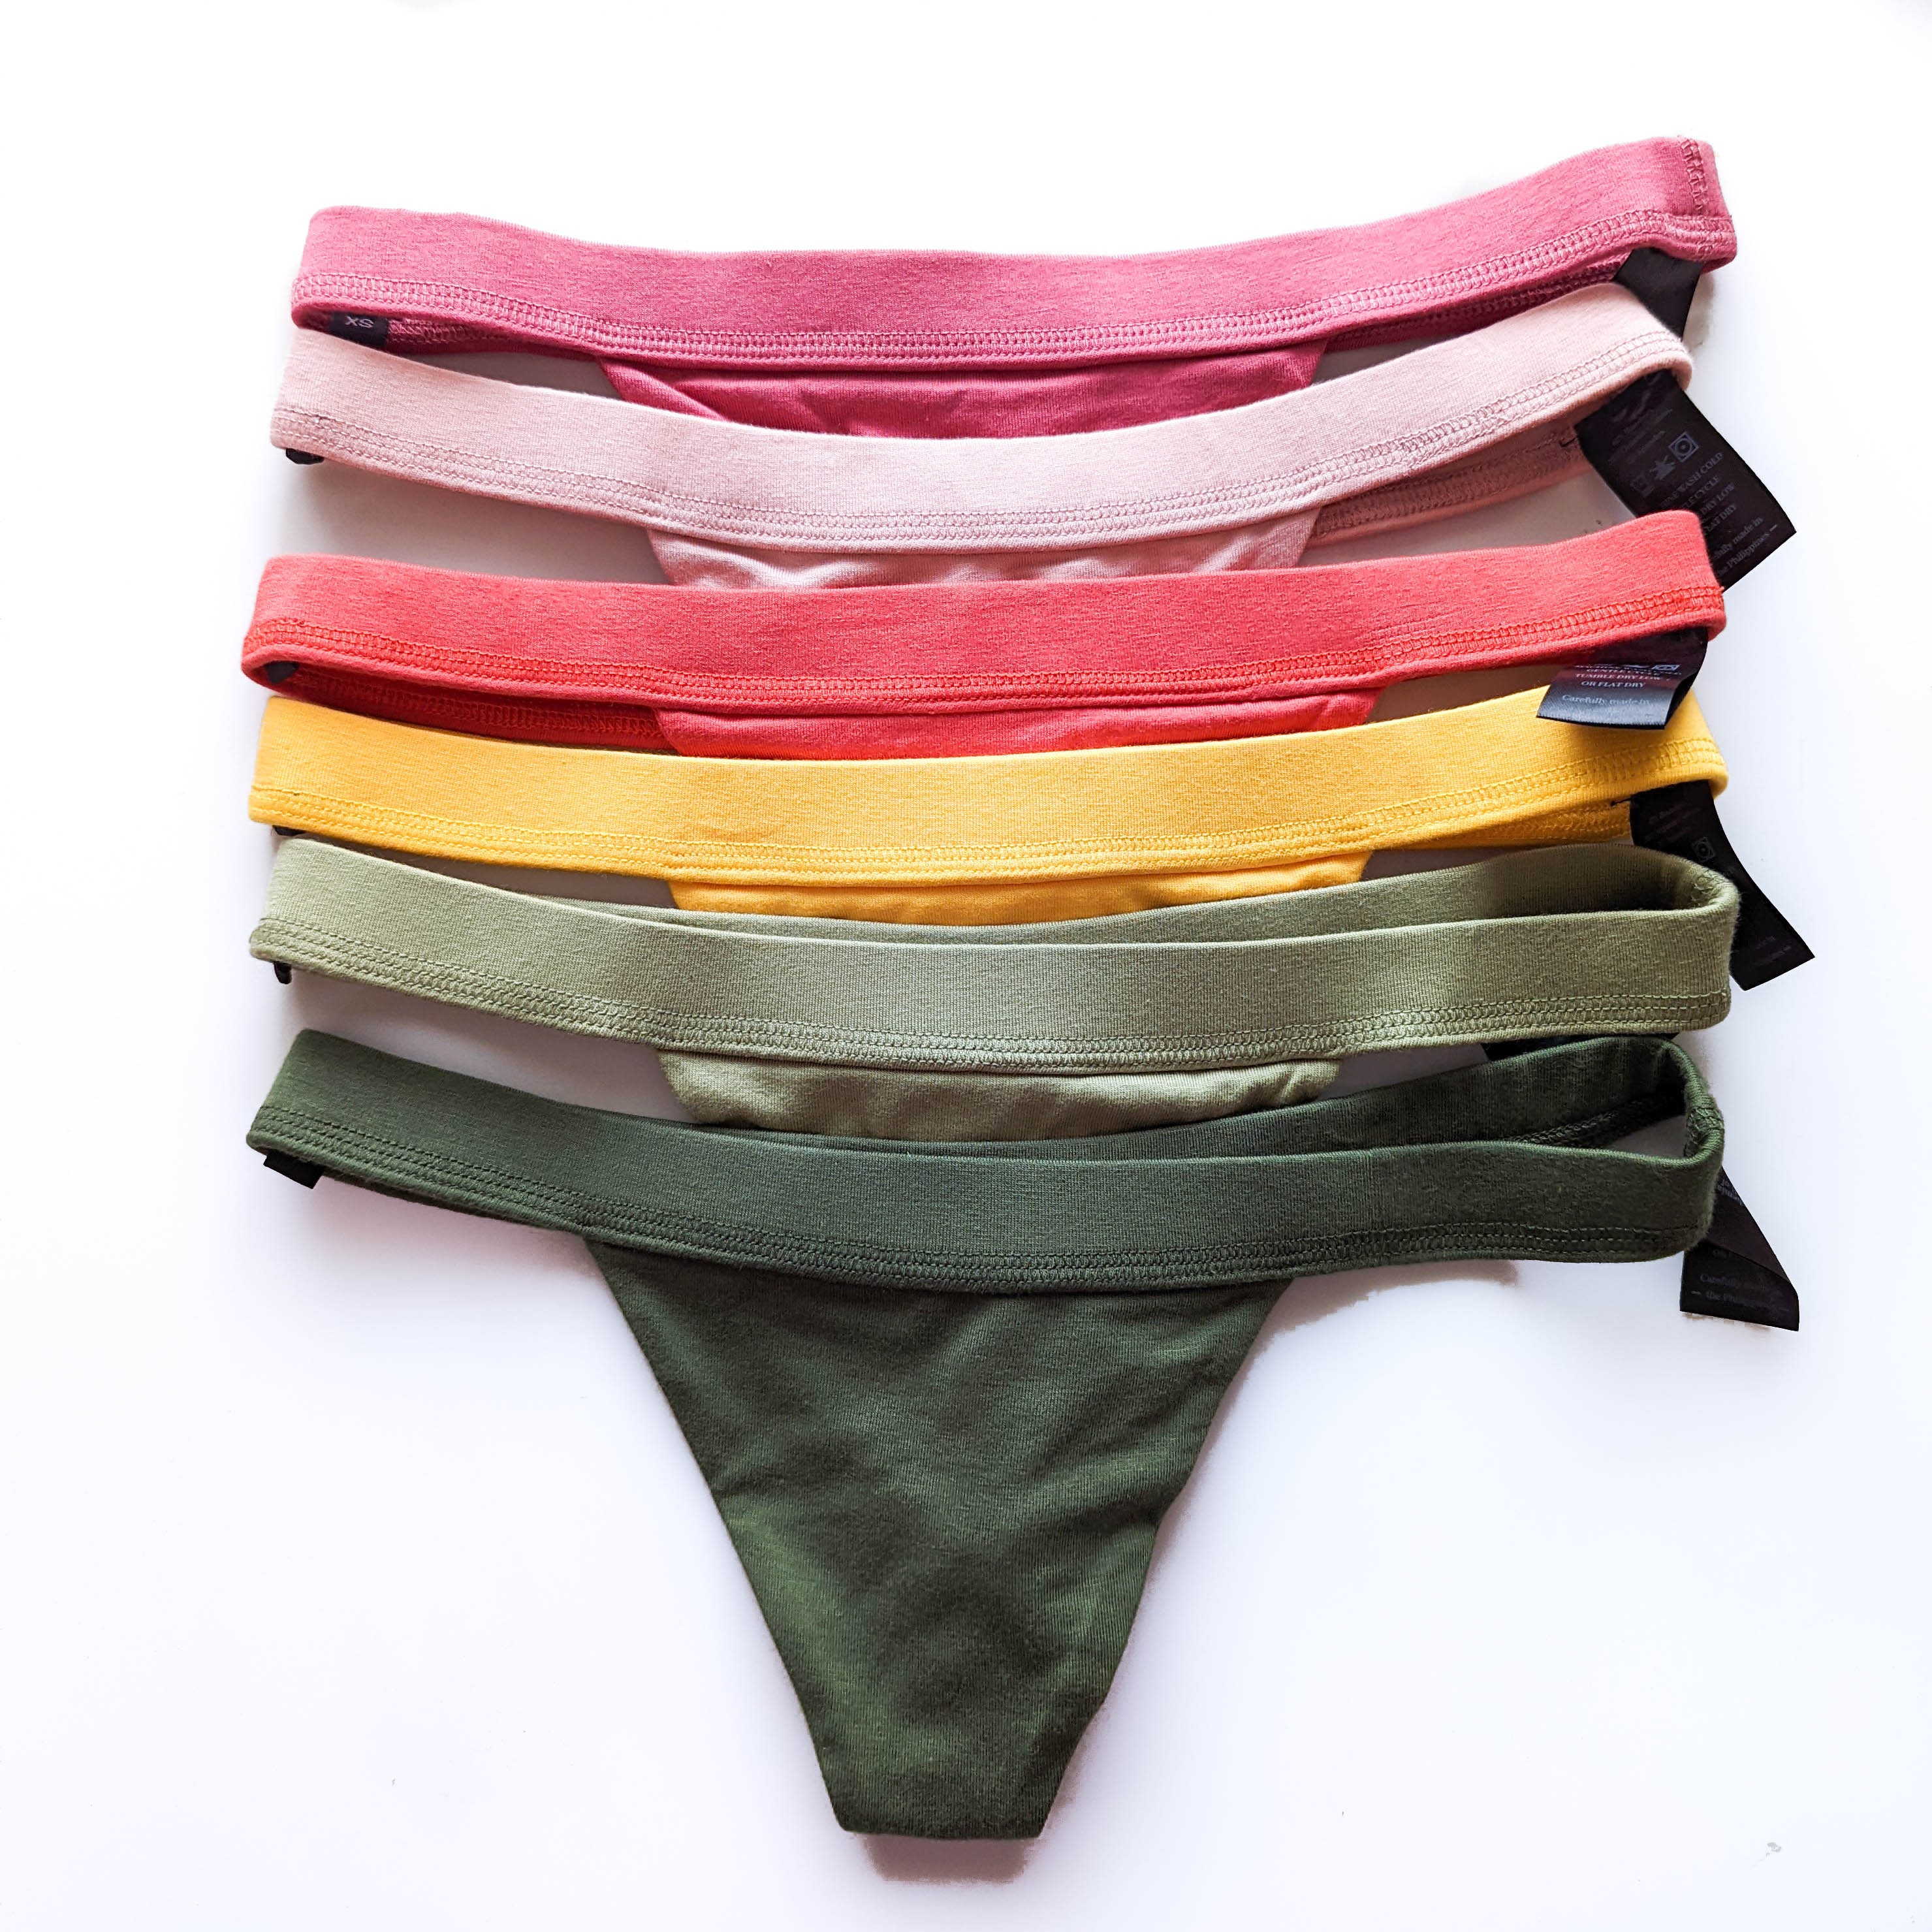 Buy Cotton Thongs Online In India -  India